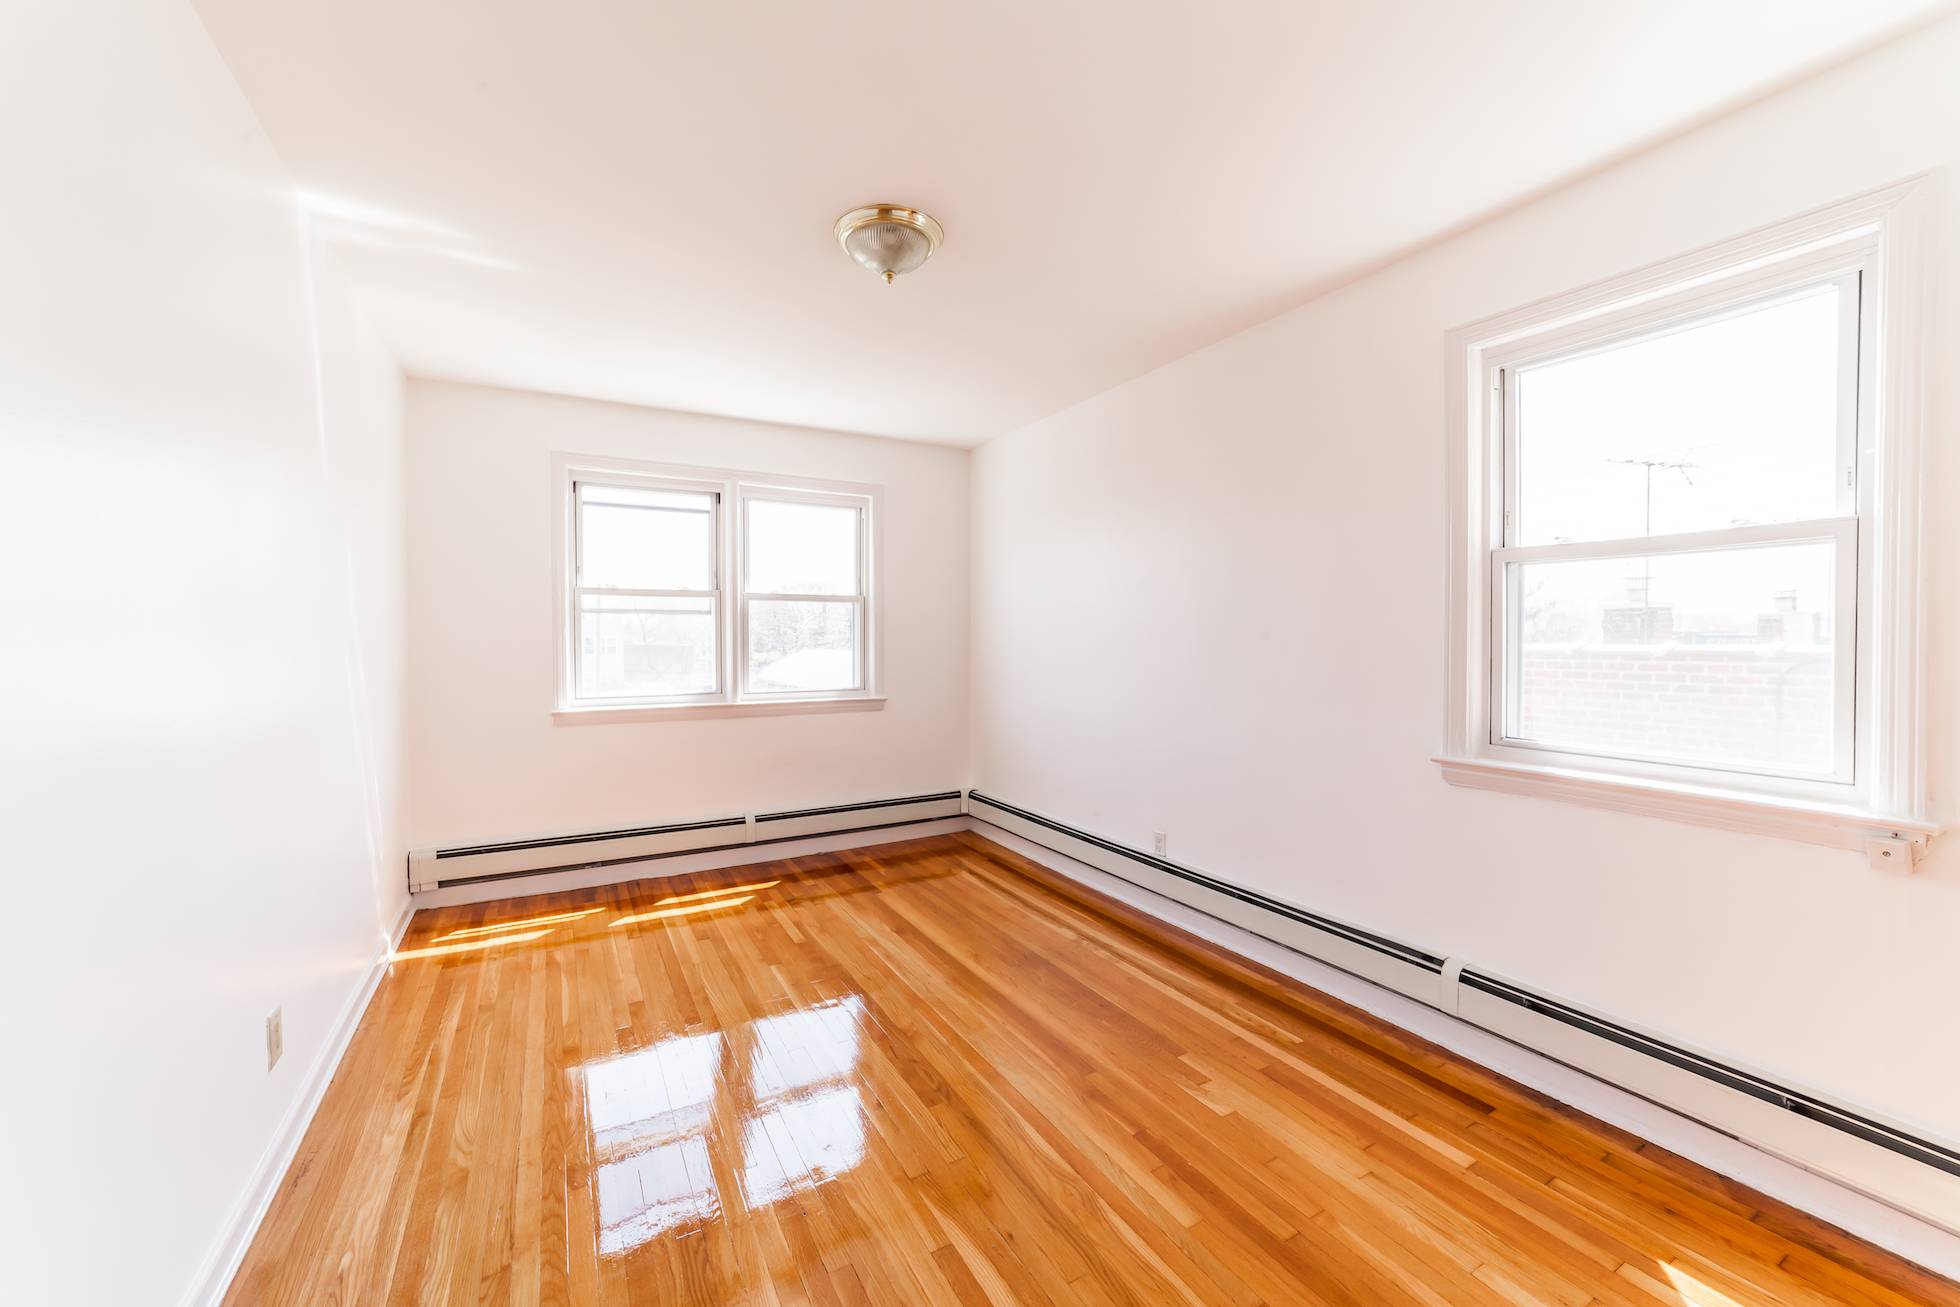 Astoria: Charming Top Floor Remodeled 3 Bedroom with Incredible Natural Light & Closet Space